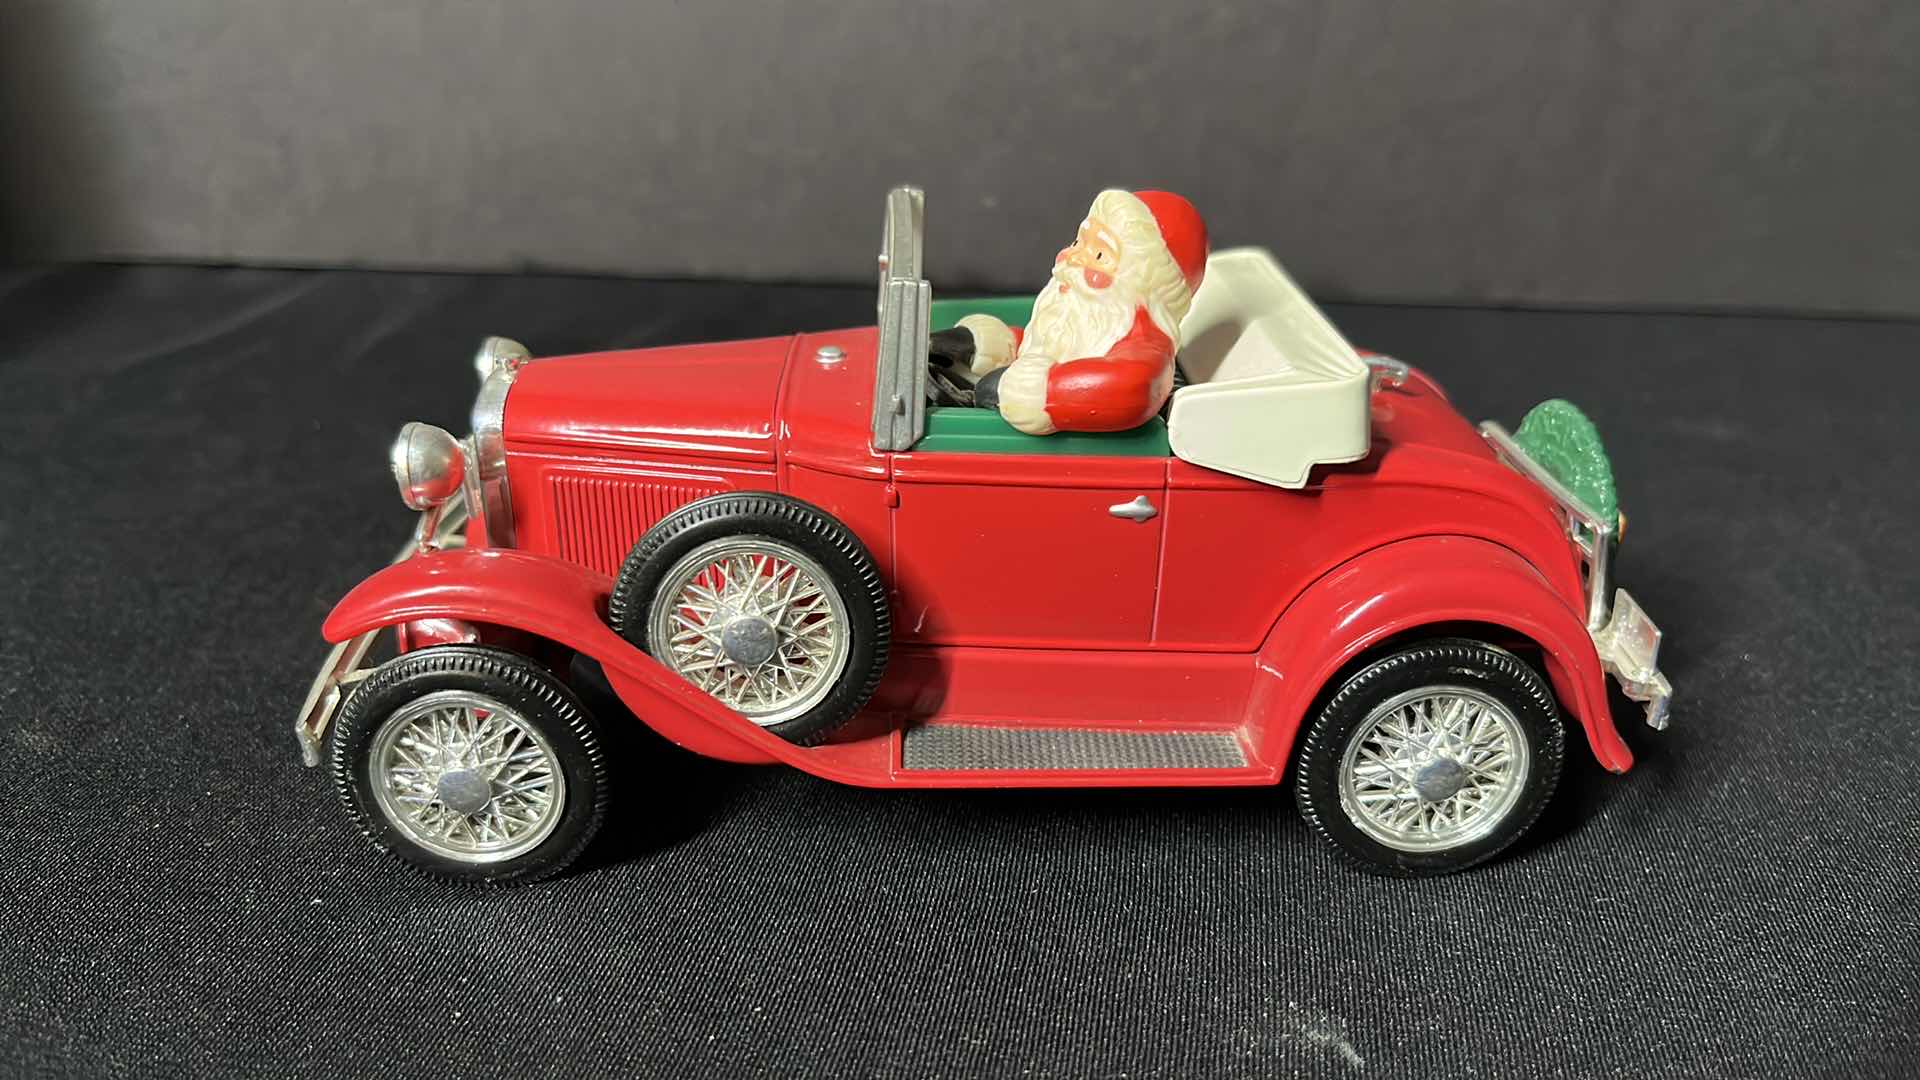 Photo 1 of THE EASTWOOD COMPANY DIE-CAST METAL GORD MODEL A 1992 SANTA’S ROADSTER LOCKING COIN BANK W KEY (STOCK #1928)